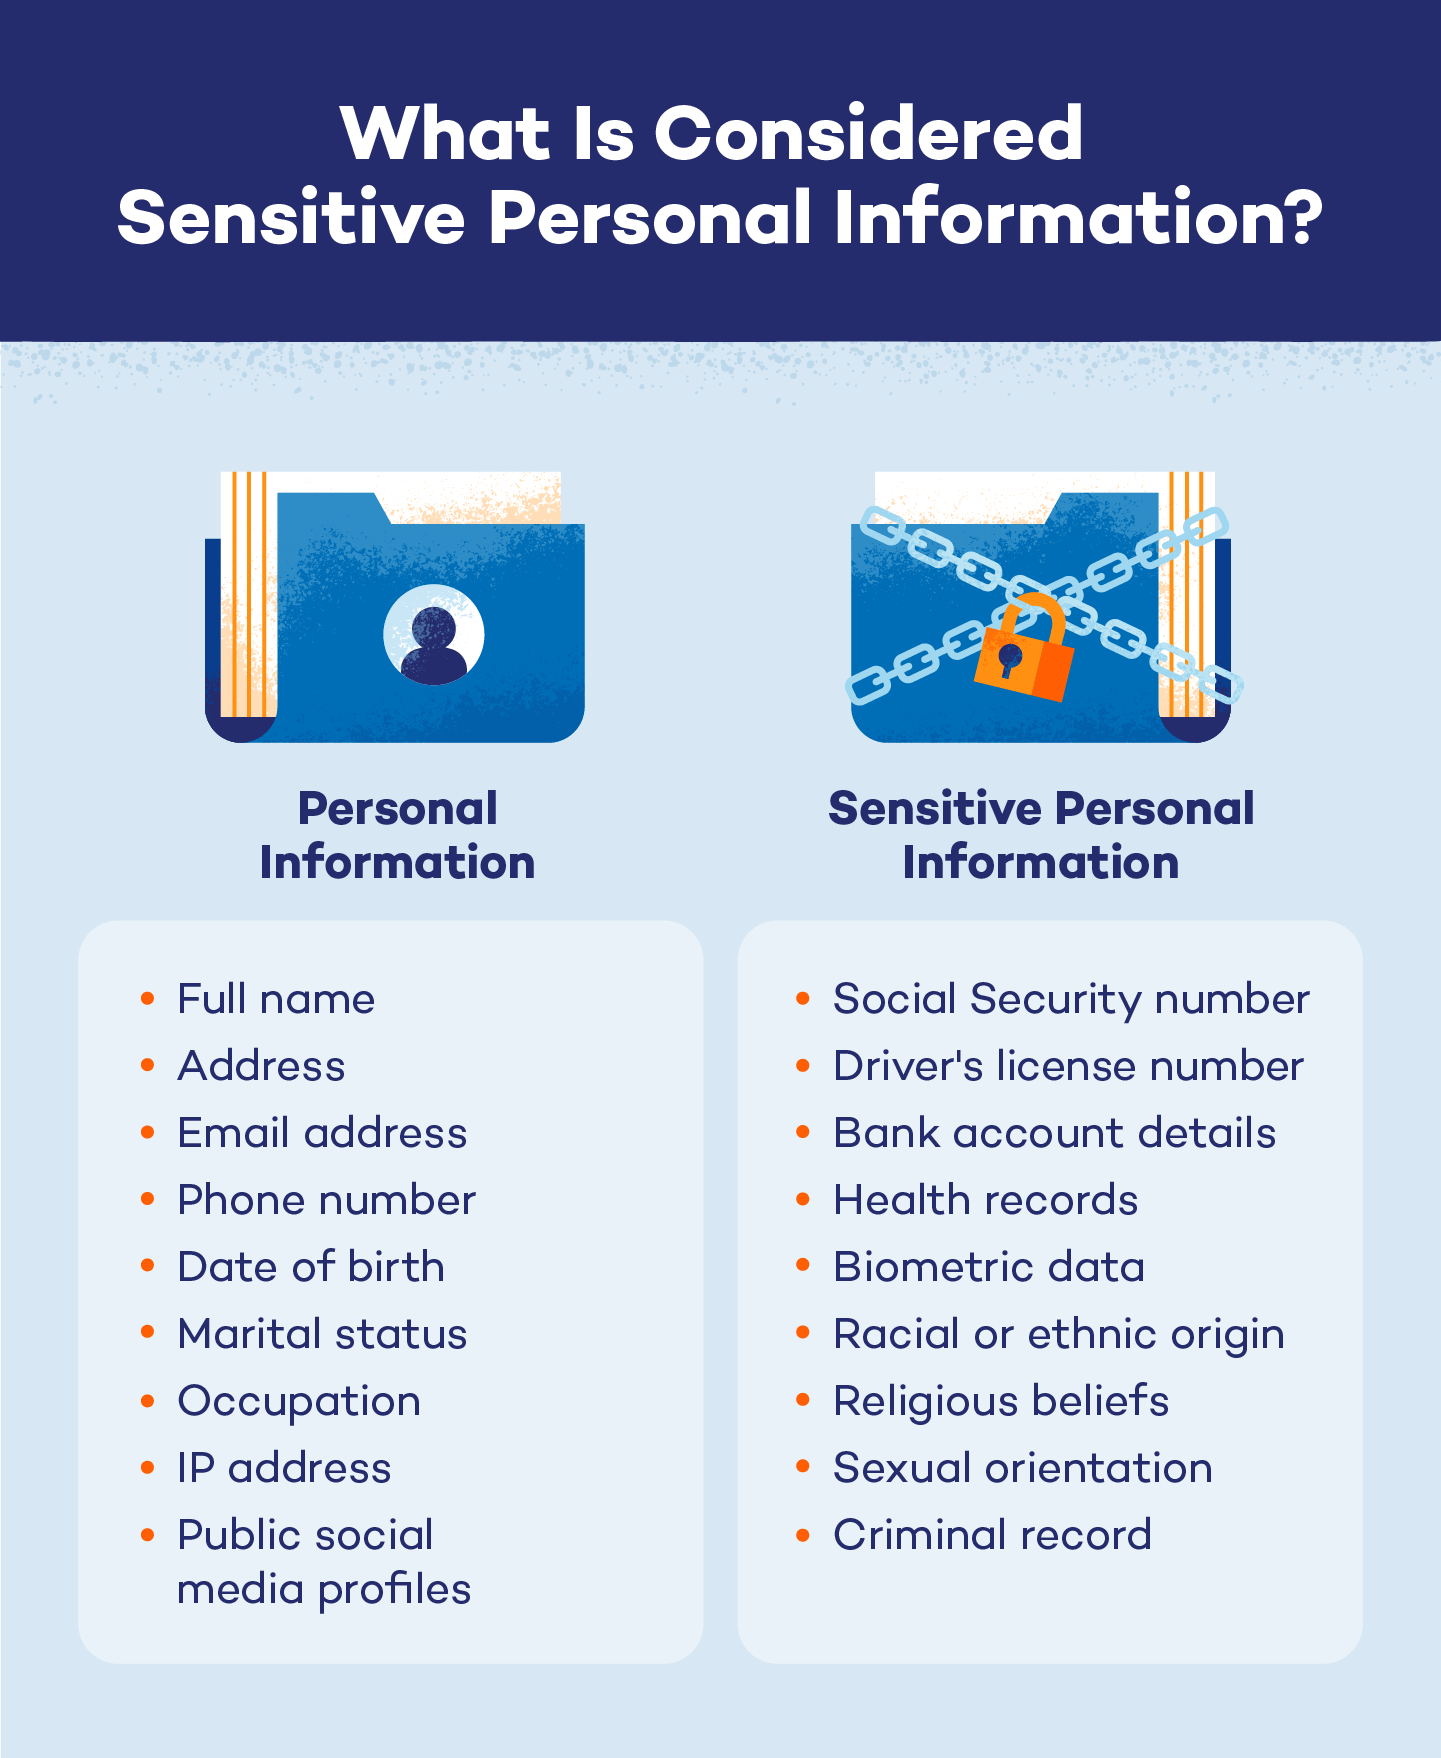 Differences between personal information and sensitive personal information.